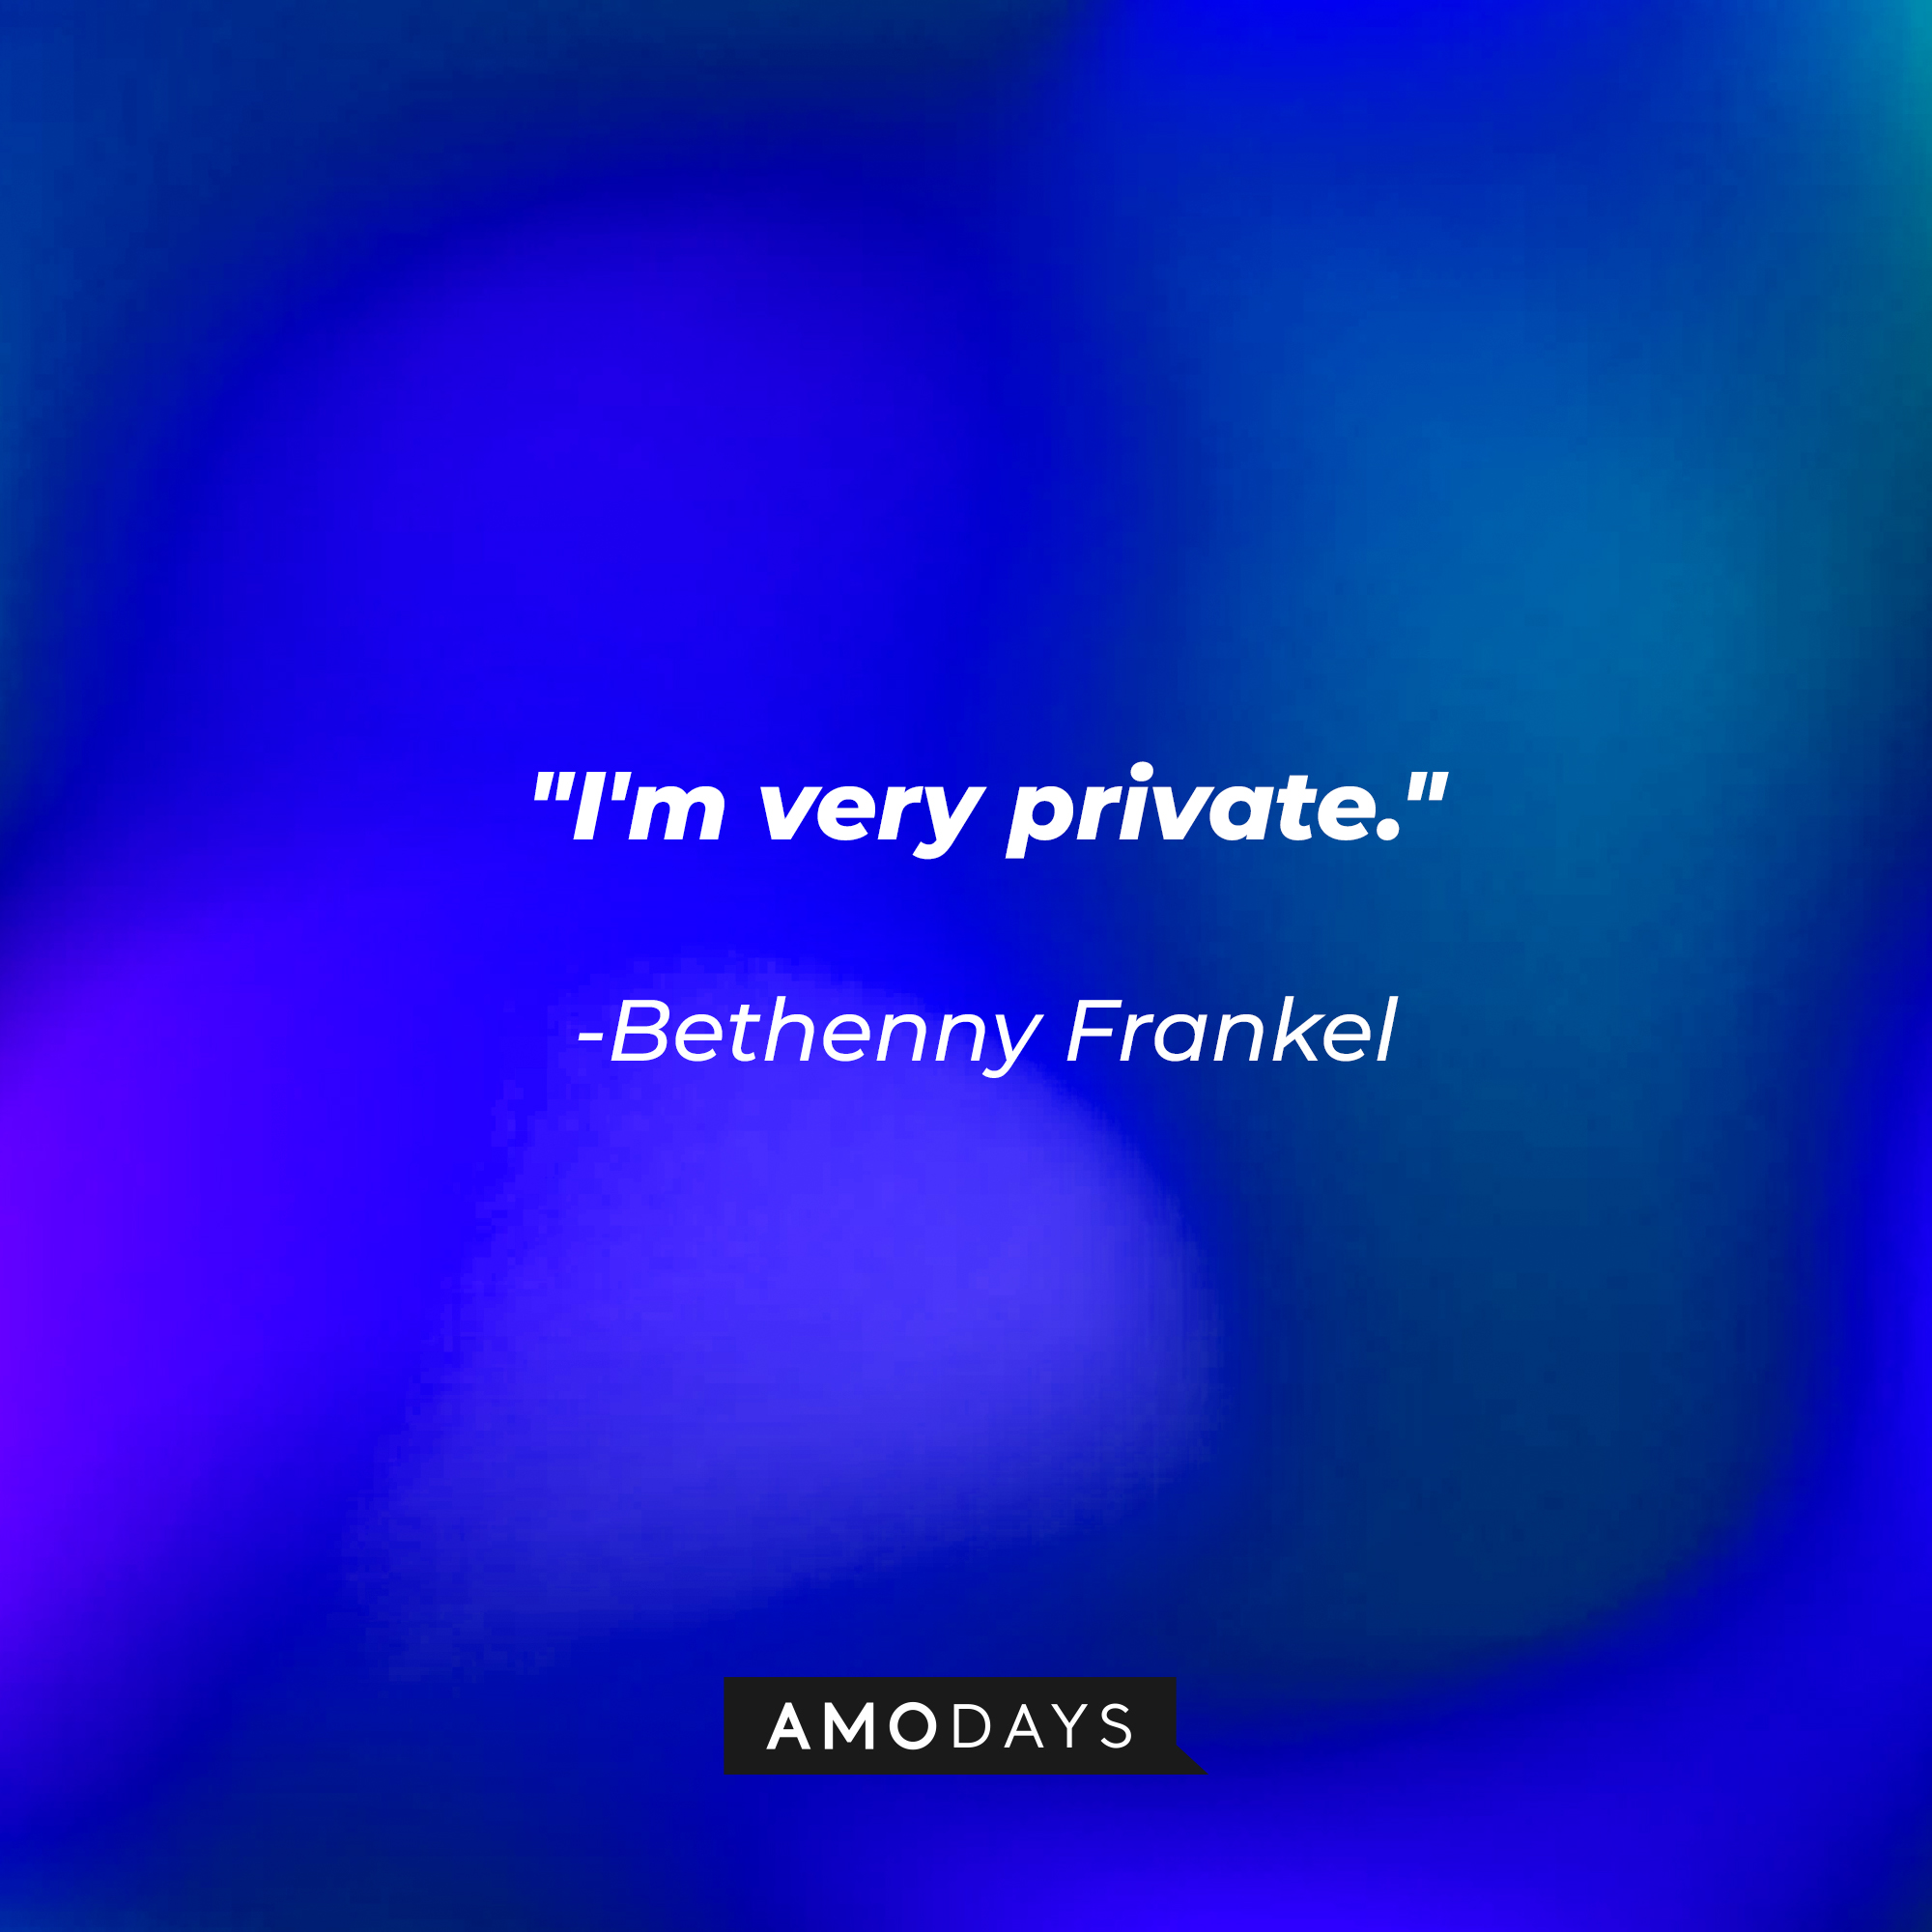 Bethenny Frankel's quote: "I'm very private." | Source: Amodays